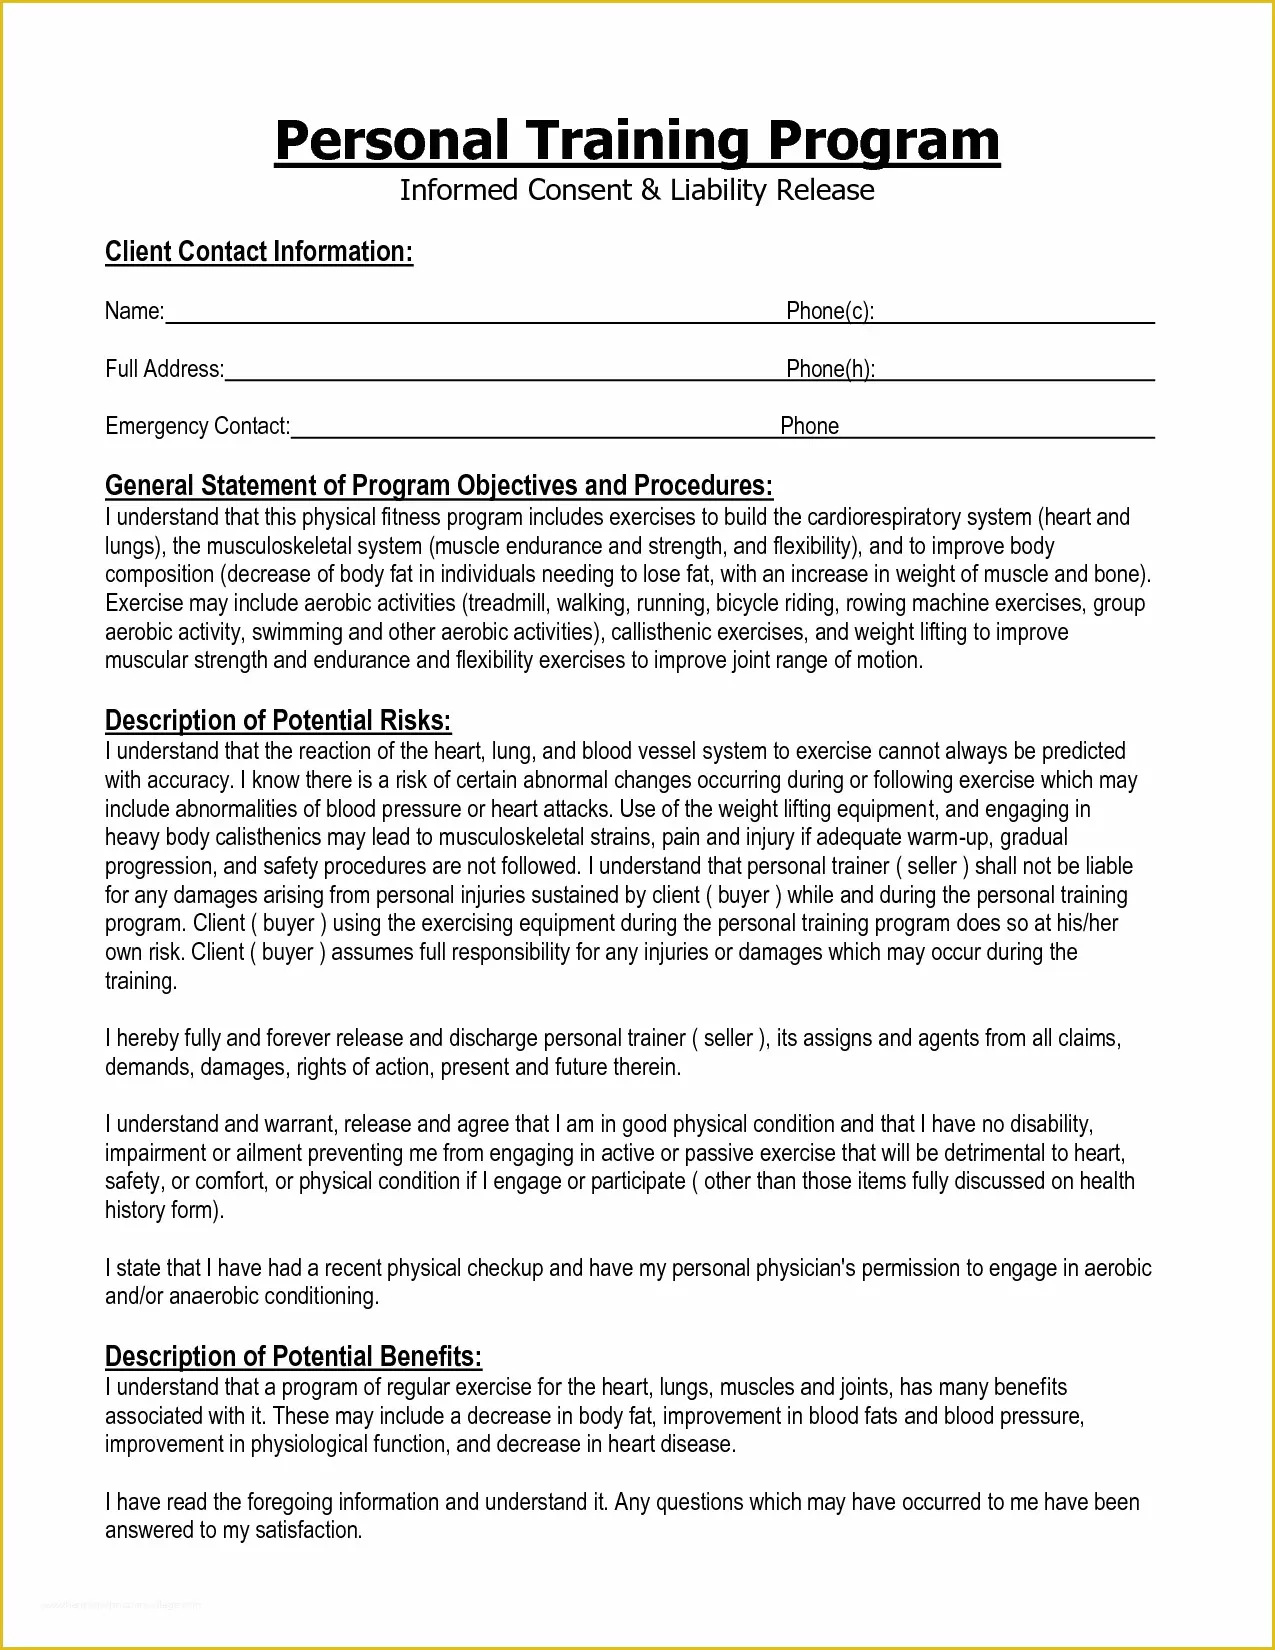 Free Fitness Waiver Template Of Informed Consent form Personal Training Google Search